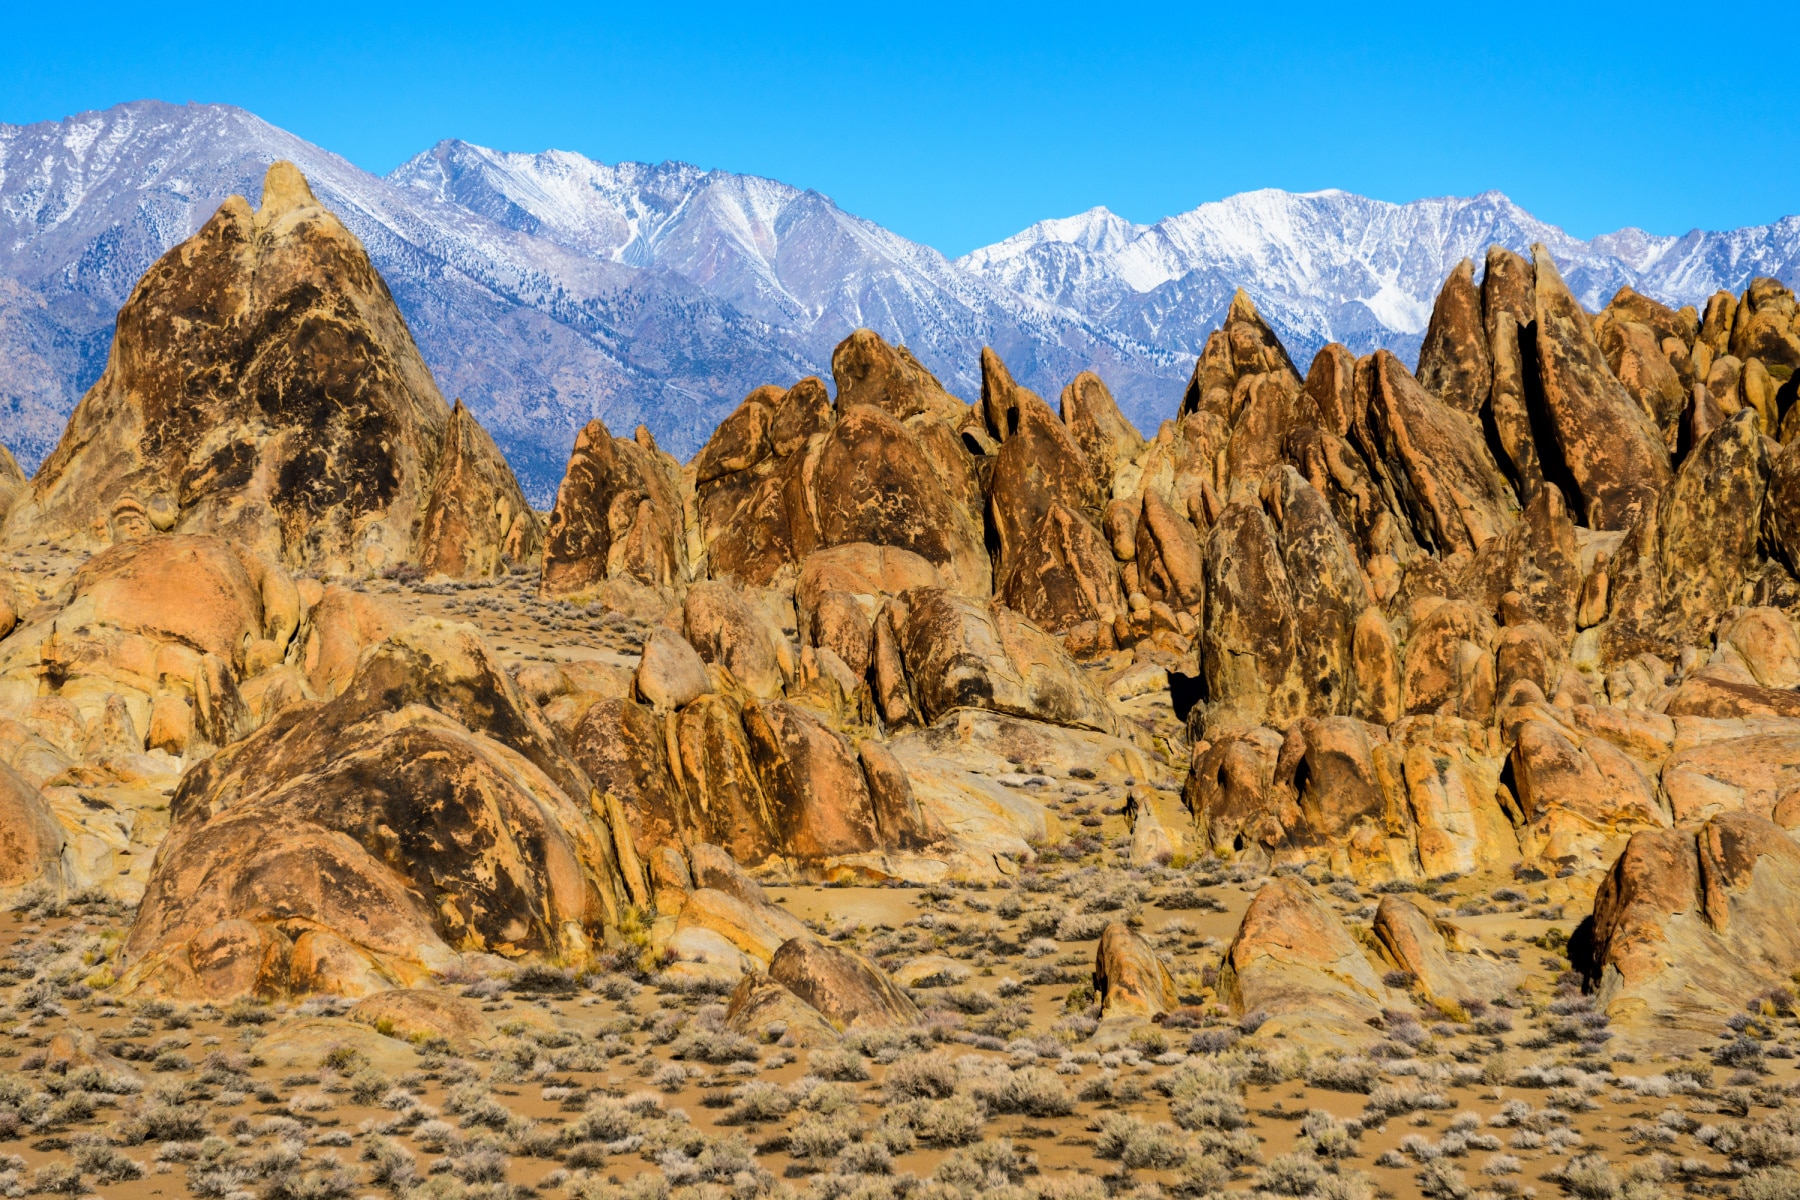 Mount Whitney's landscape shows snow-covered mountains int he back and brownish orange mountains in the foreground.